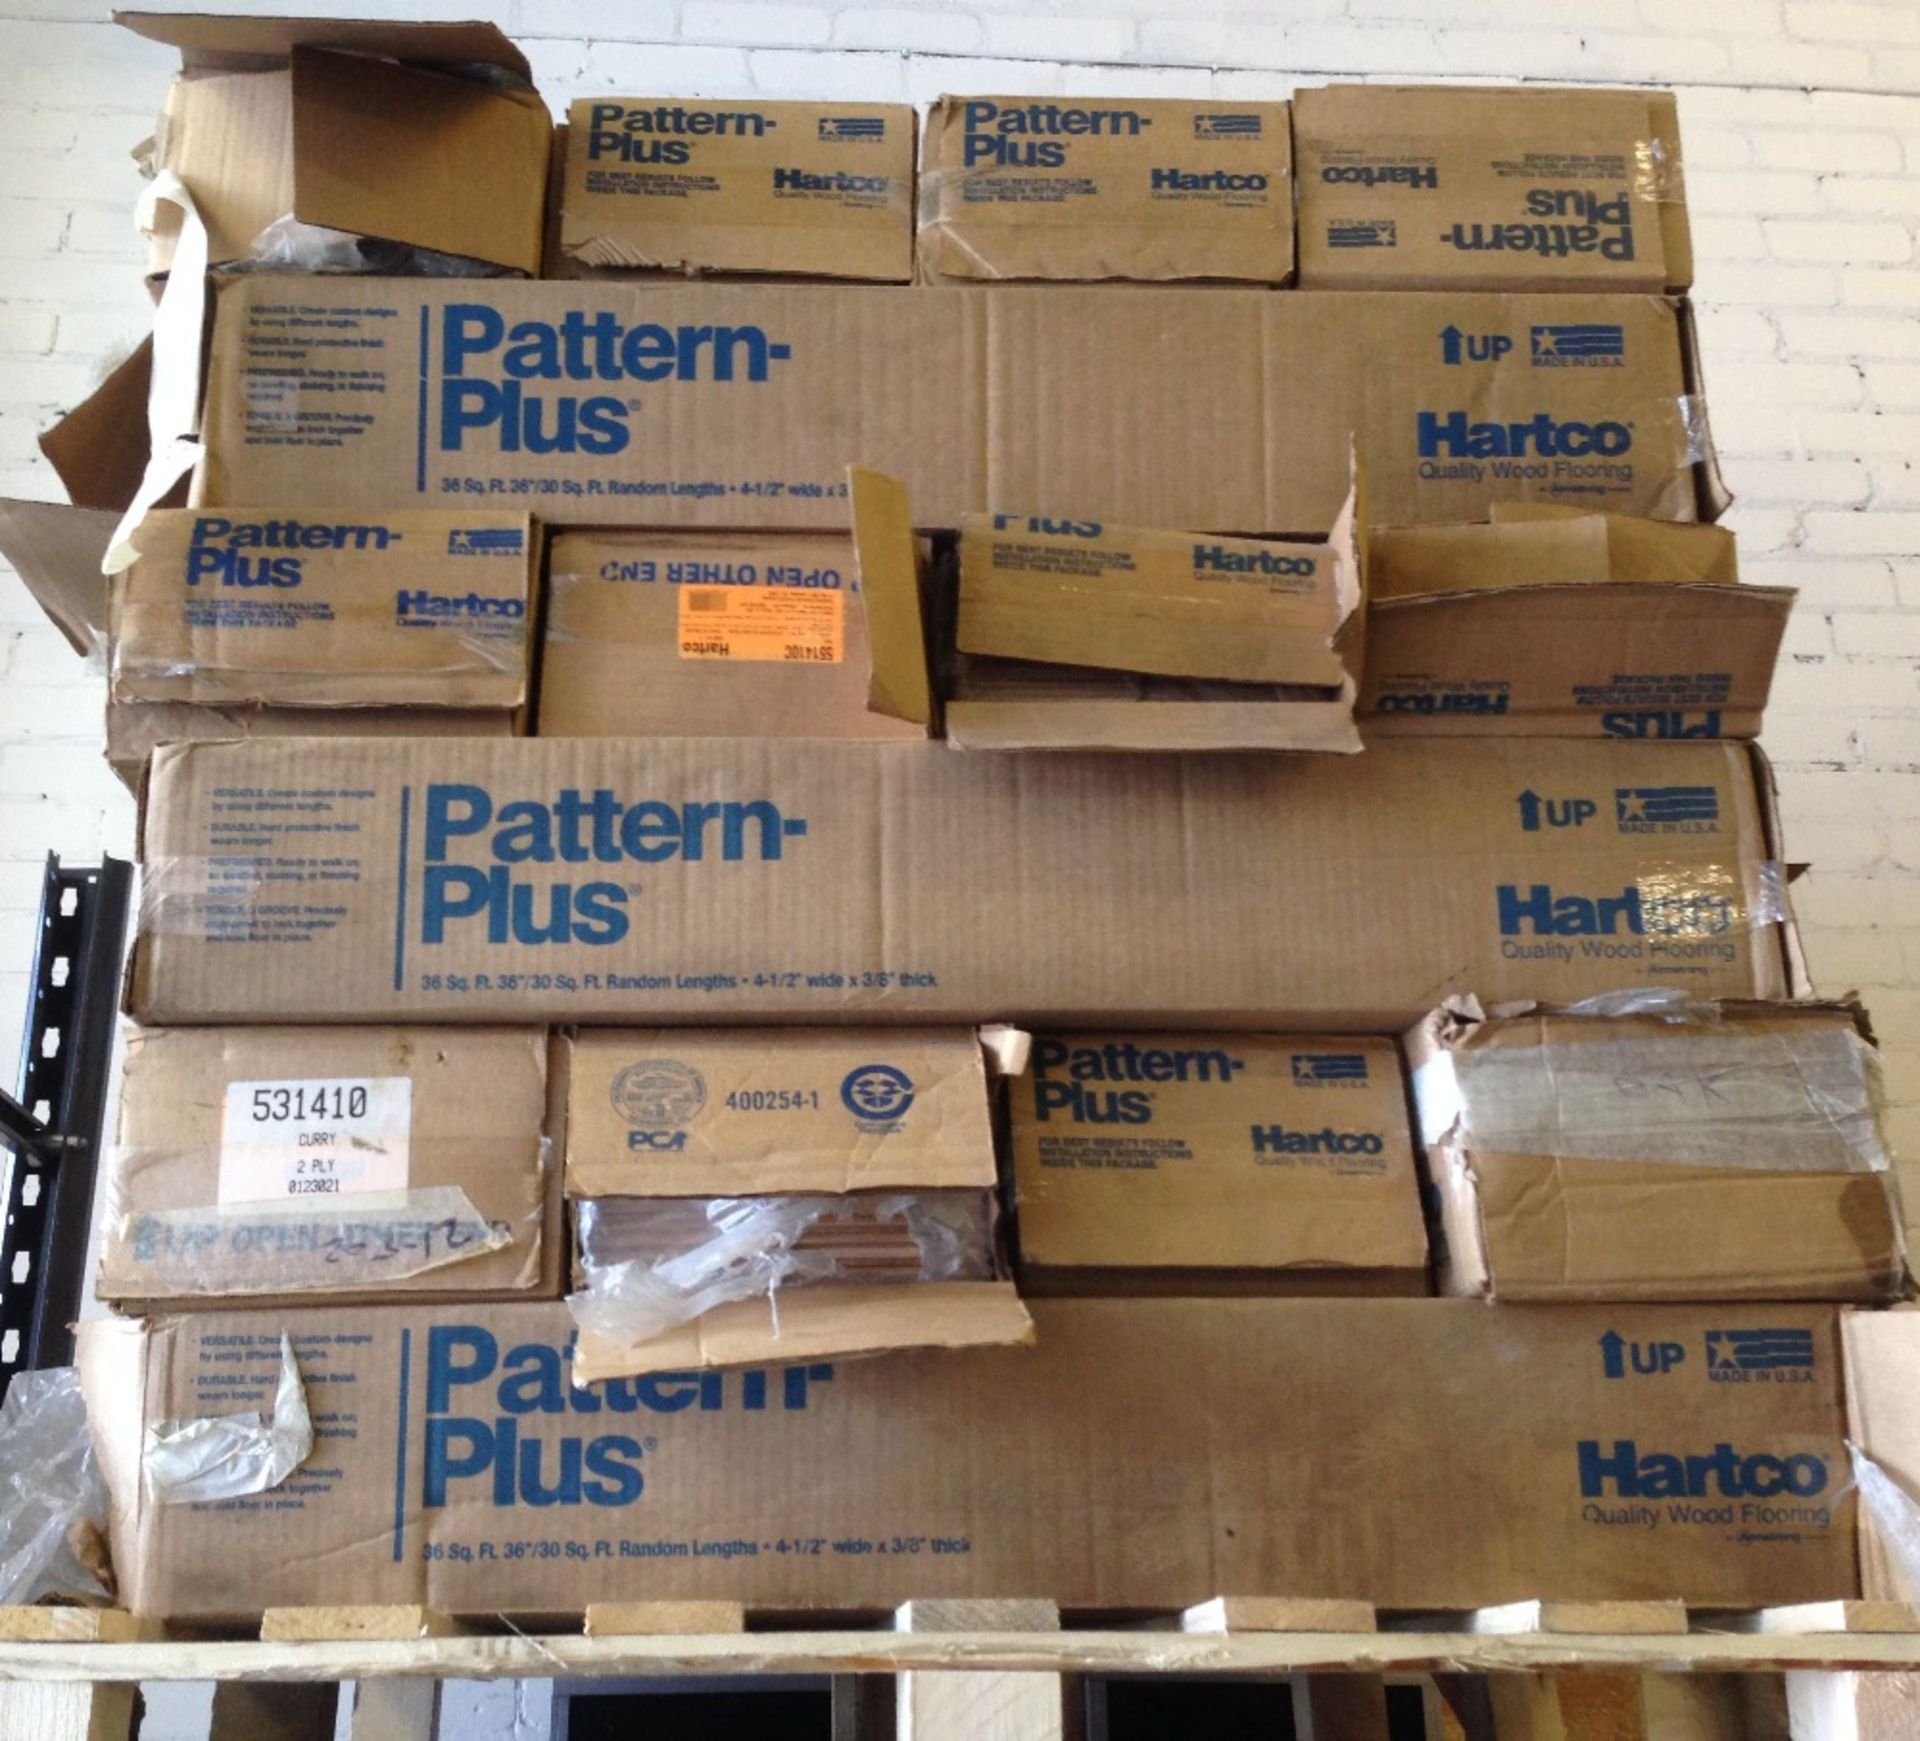 26 x Packs of Hartco wooden flooring approx 30 square foot per pack